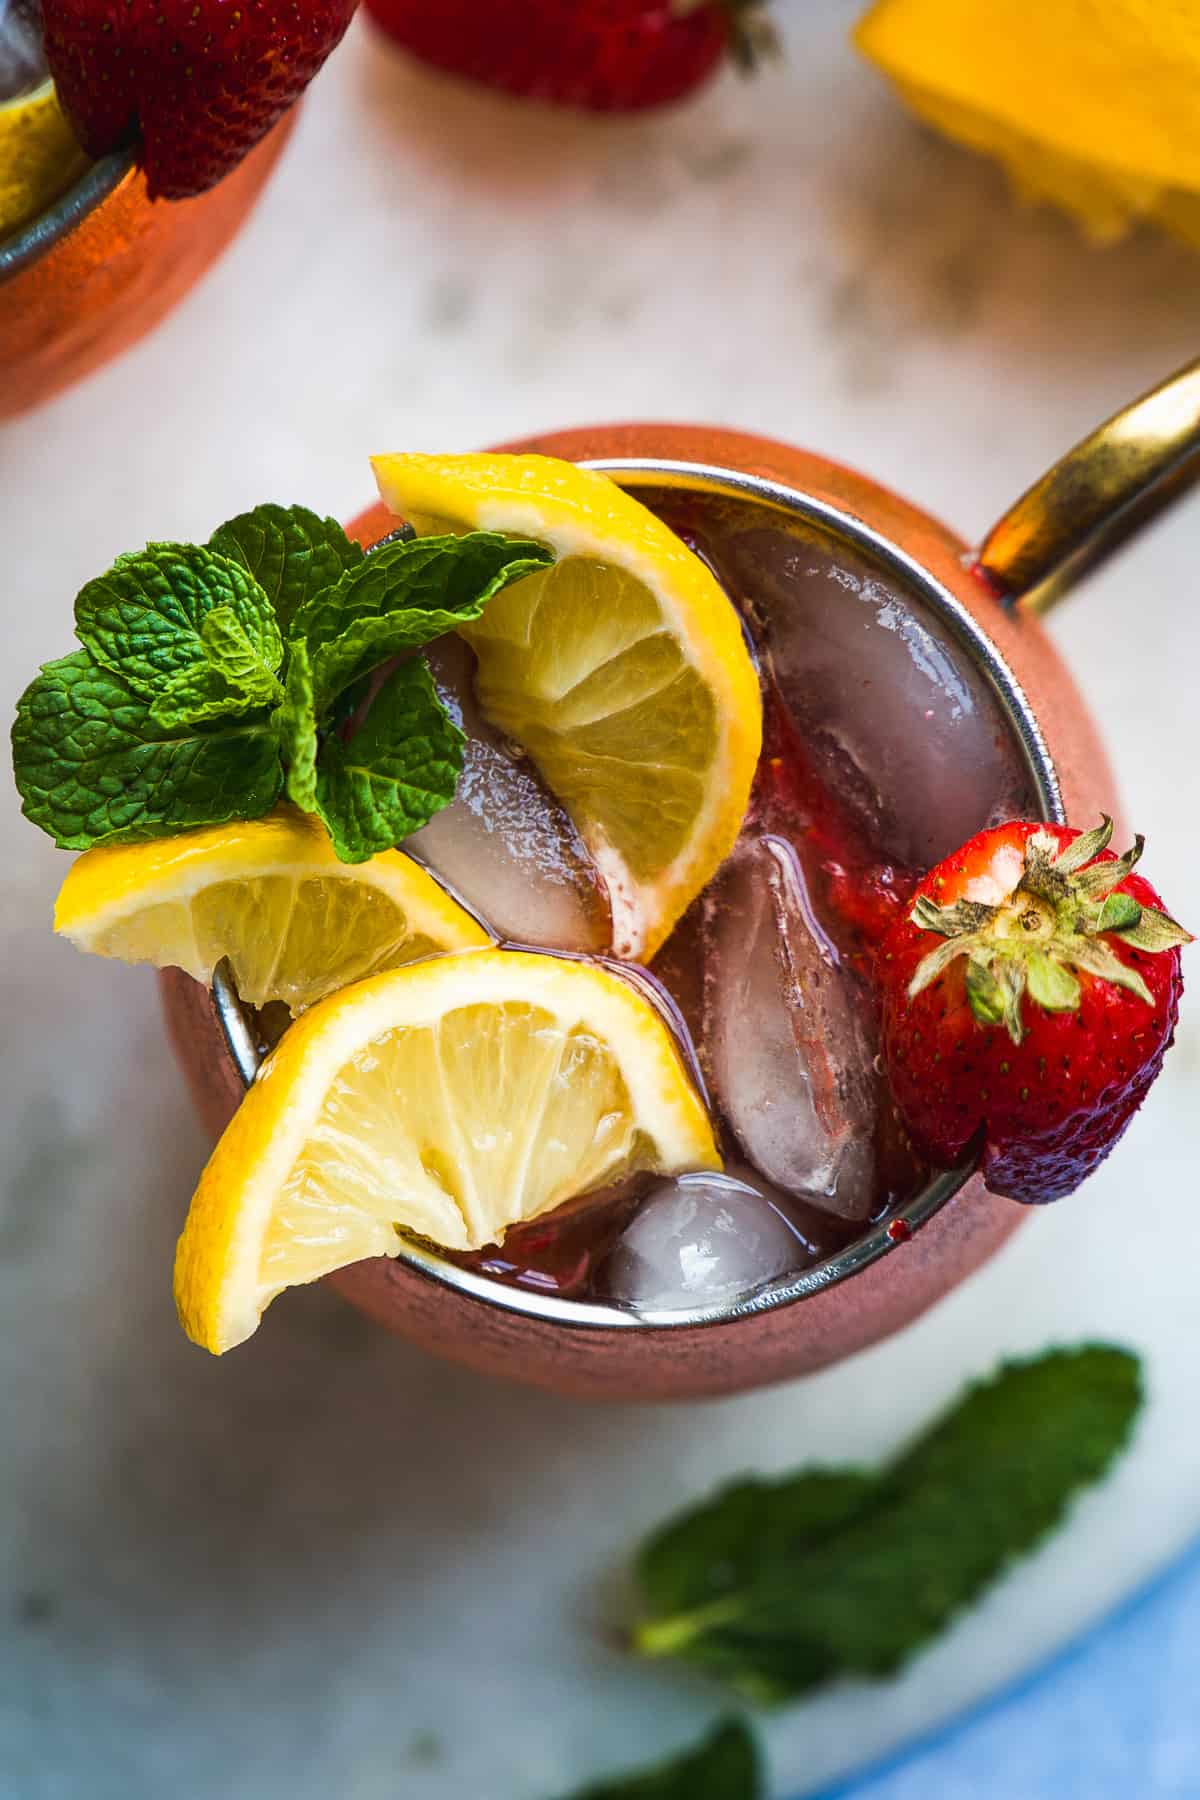 Overhead view of a Kentucky mule with strawberries and lemon slices on top.